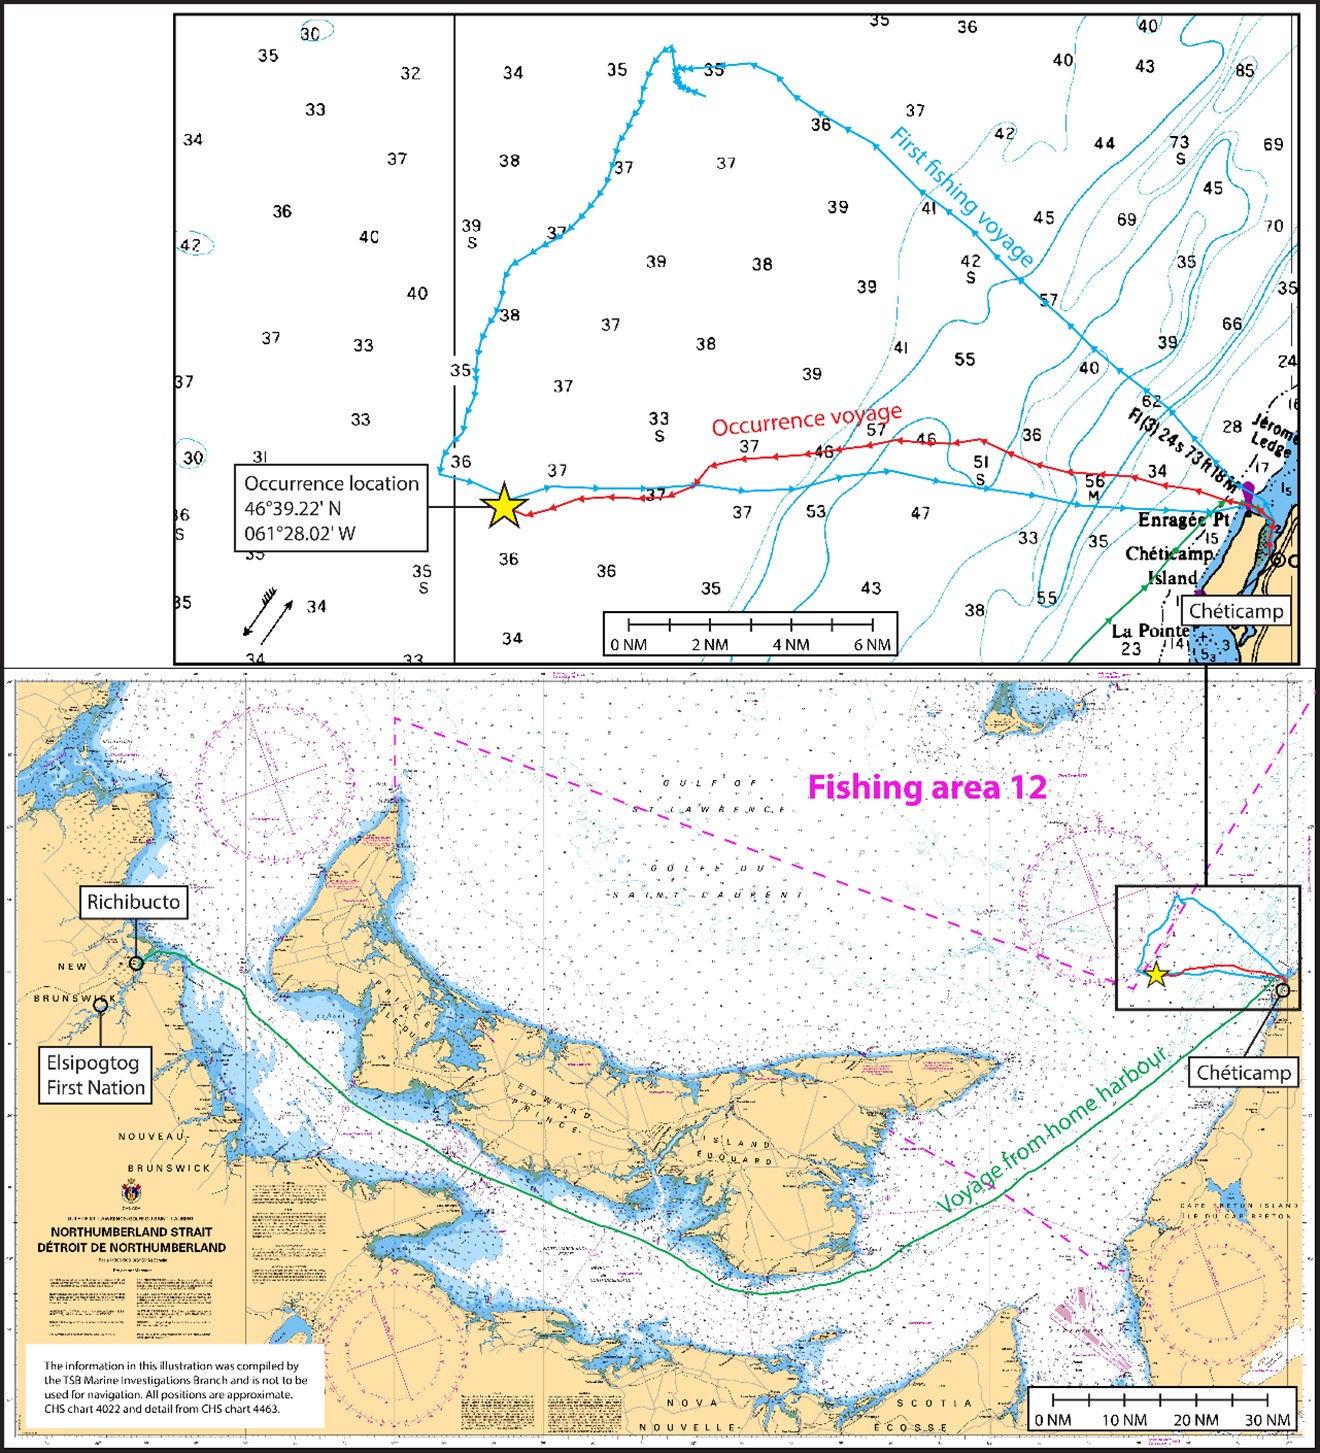 Chart of the occurrence location near Chéticamp (inset image) with main image showing the route from the home harbour (Source of main image: Canadian Hydrographic Service chart 4022, with TSB annotations. Source of inset image: Canadian Hydrographic Service chart 4463, with TSB annotations)